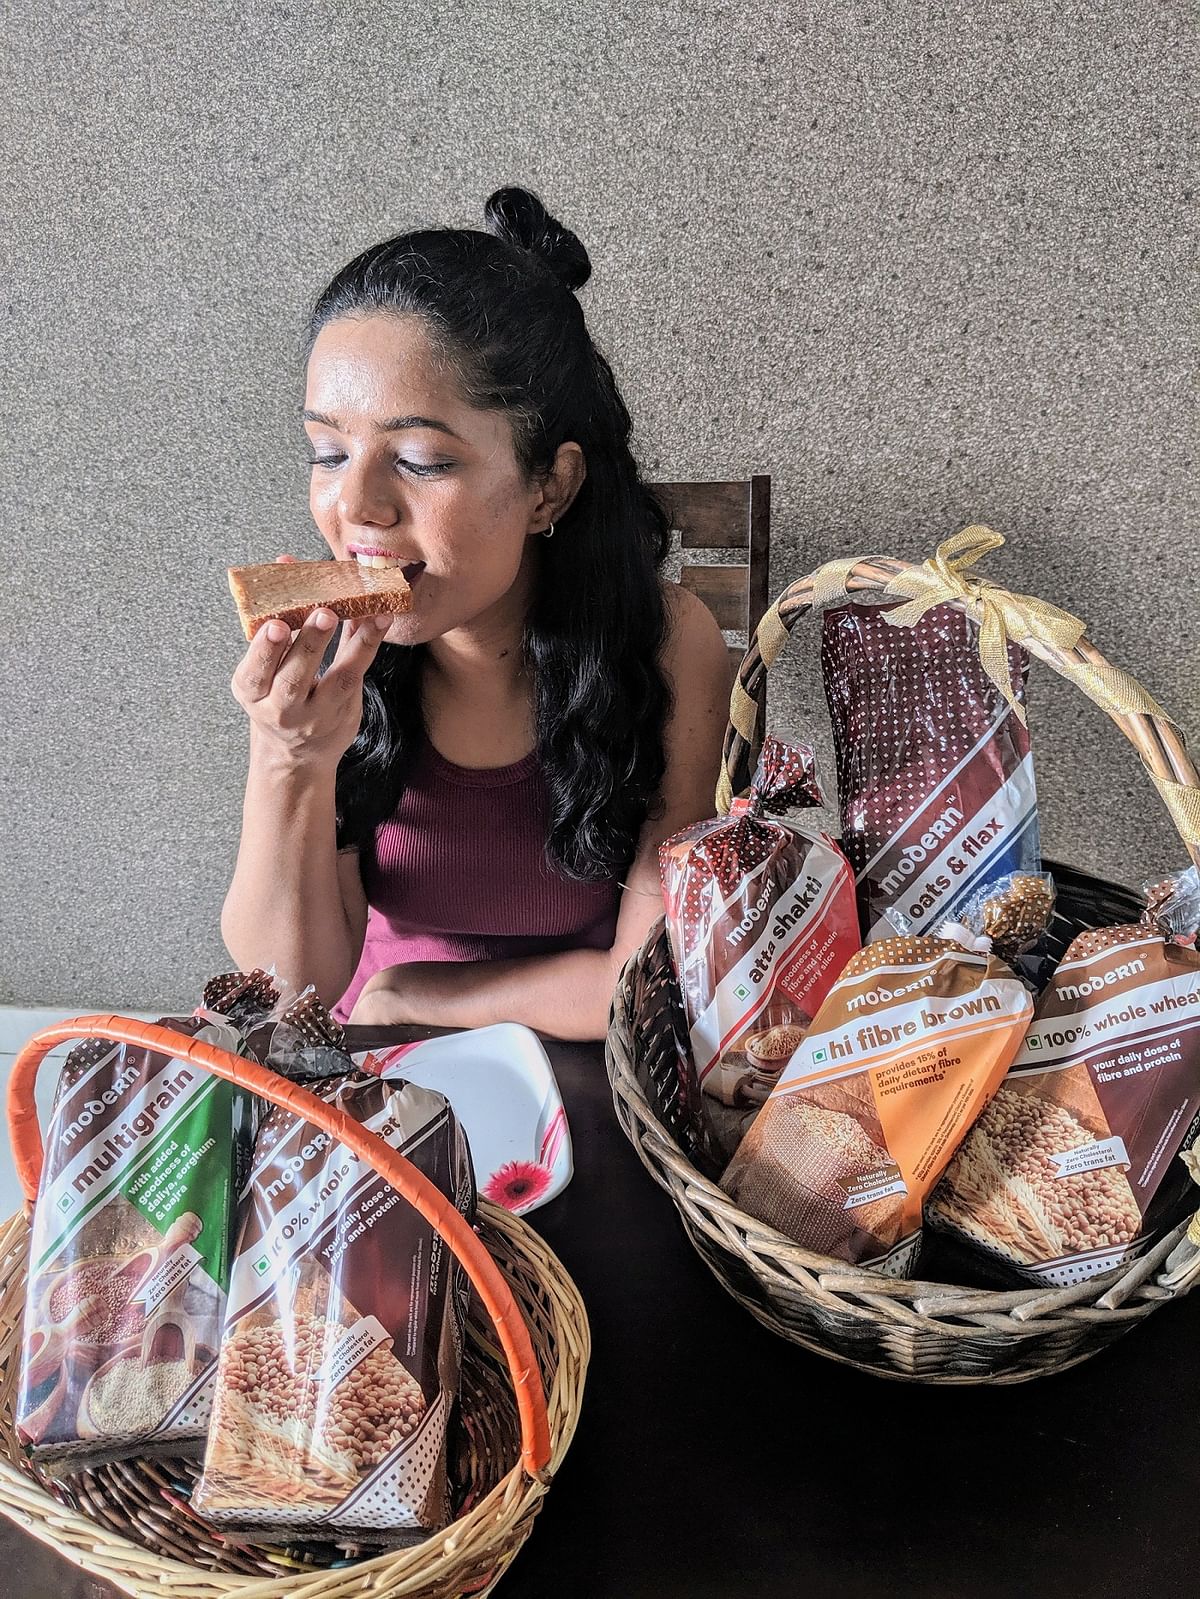 Sometimes brands send expired products and expect influencersto promote them, says brand consultant and blogger Rumana Nazarali. (Above) A sponsored post she did with Modern Breads